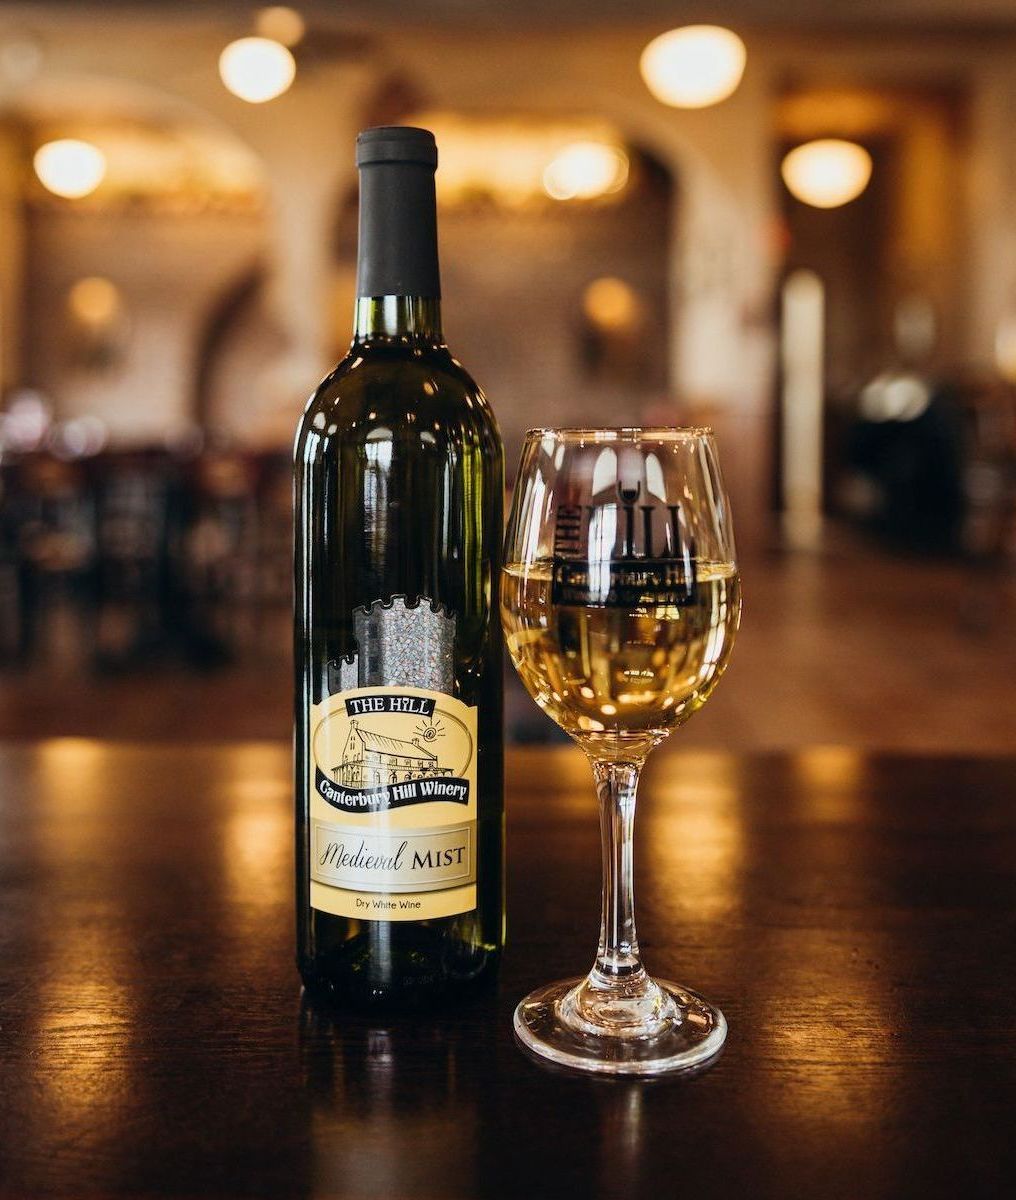 Mideival Mist Is One of the Signature House Wines Served at Canterbury Hill Winery & Restaurant.